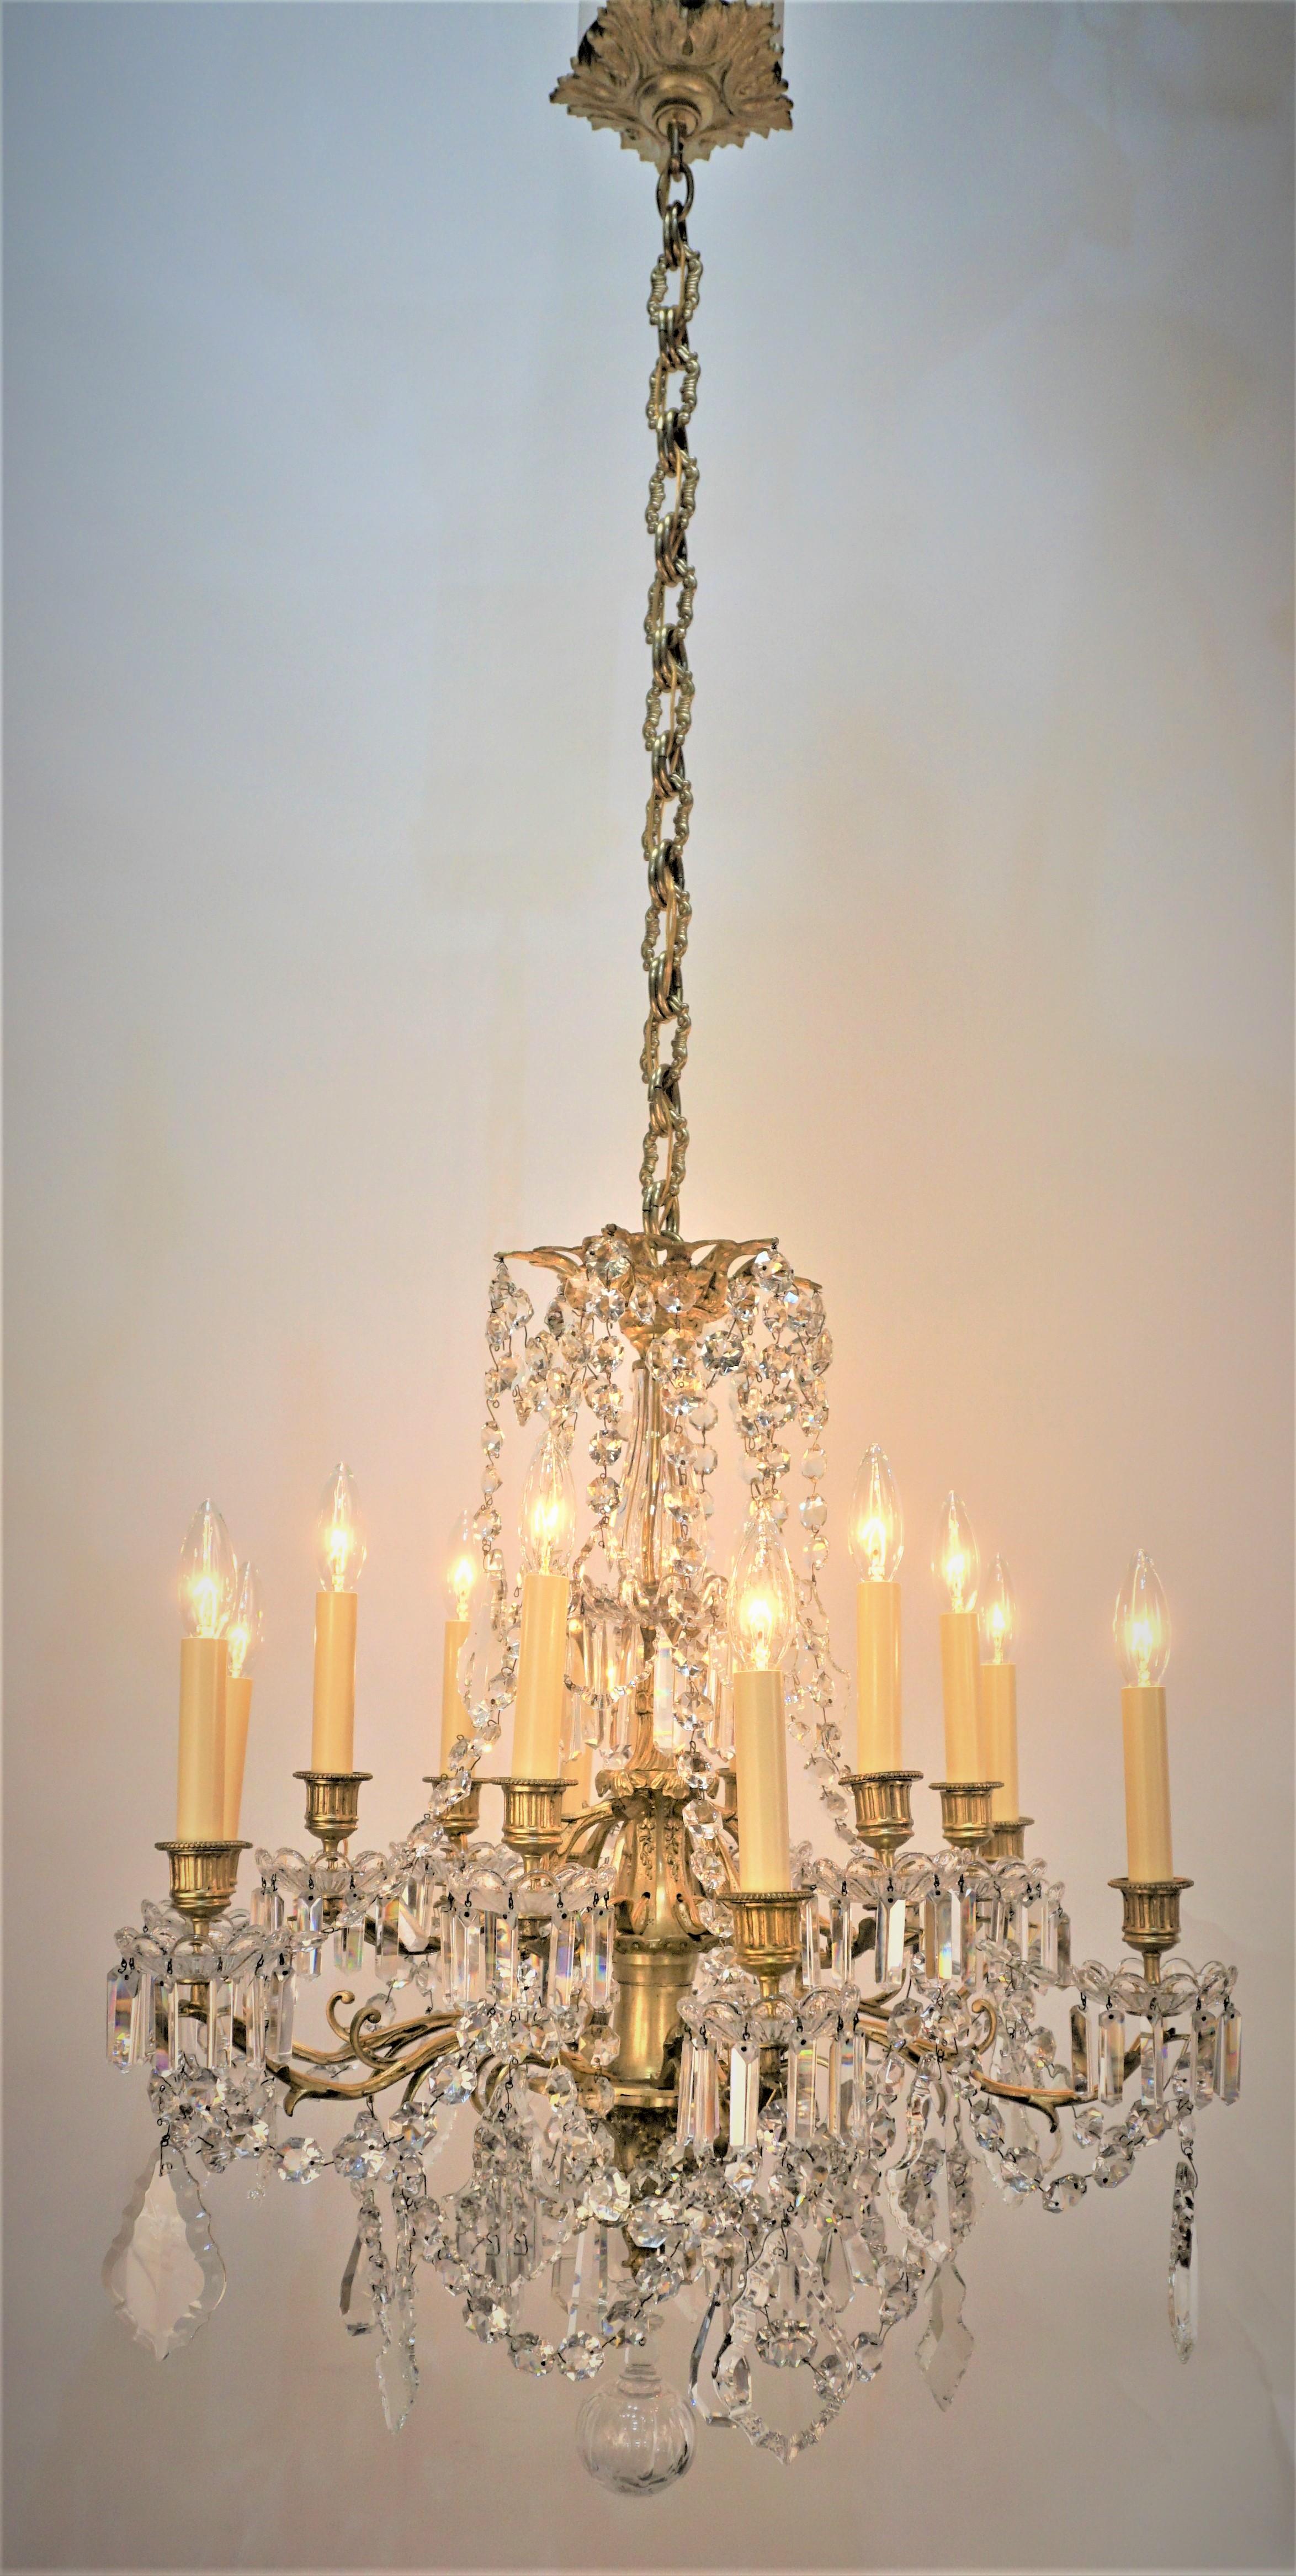 French 19th Century twelve Light Baccarat Crystal Chandelier For Sale